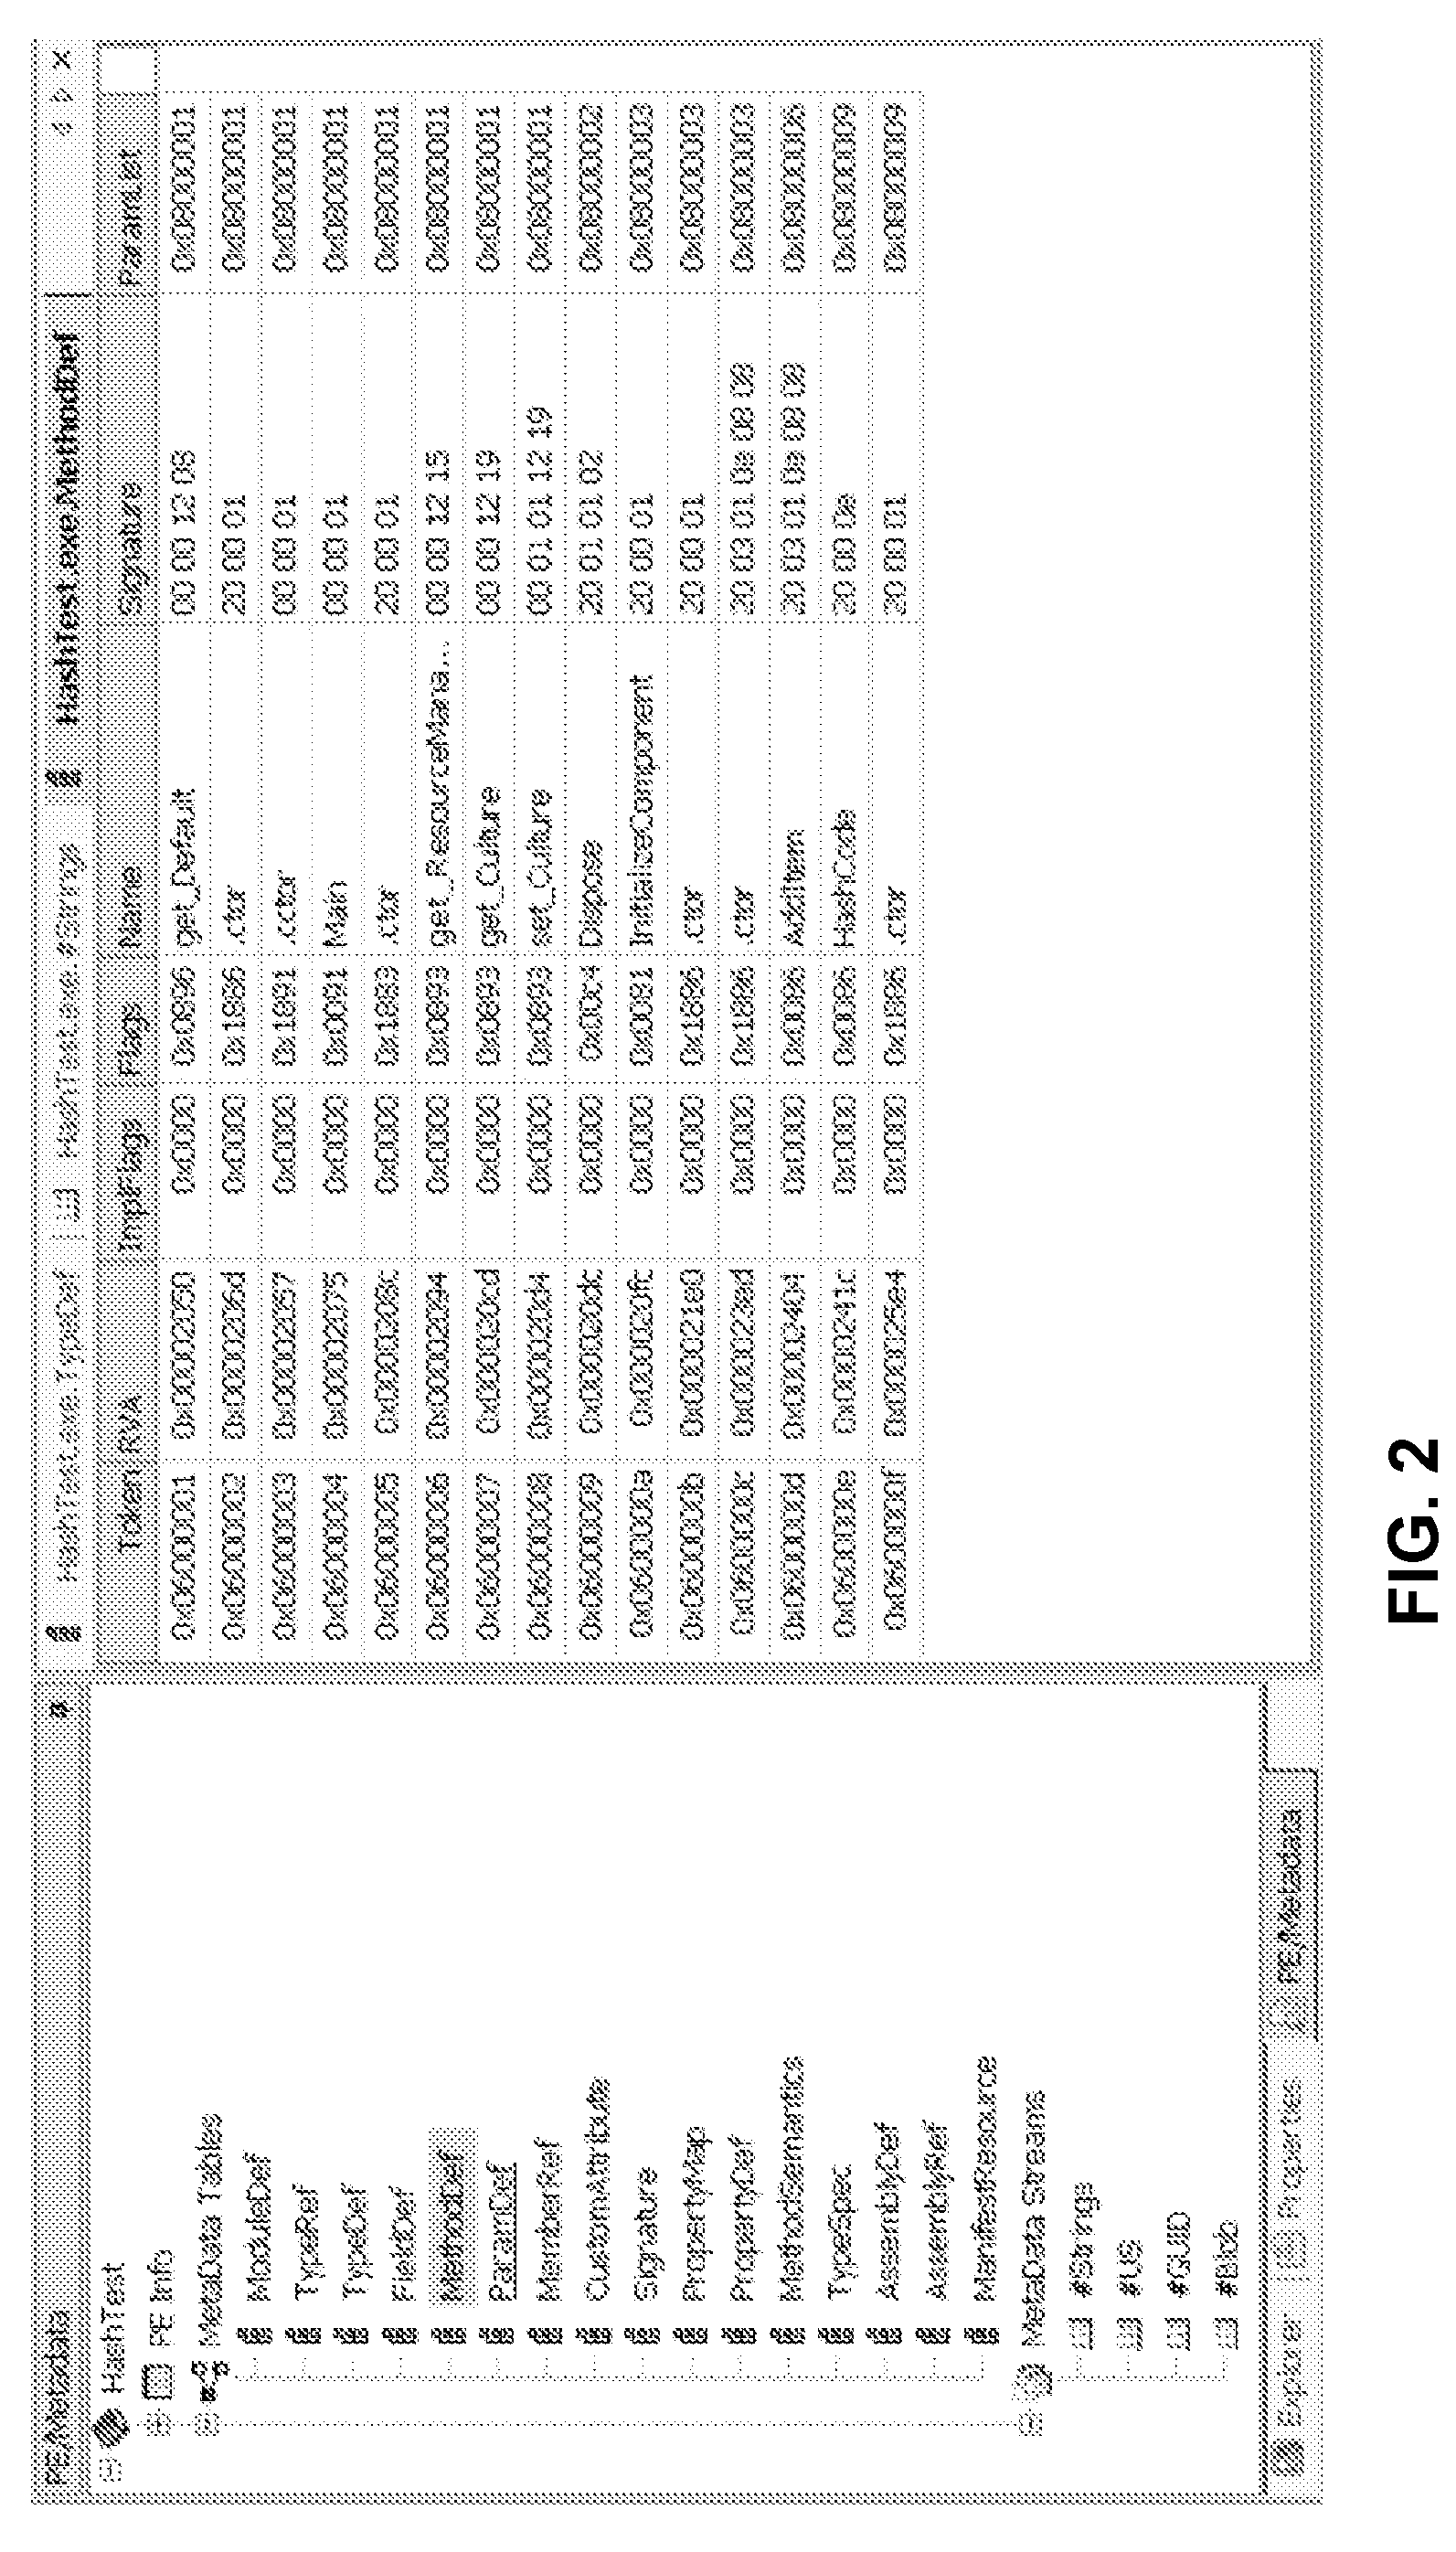 System and method for obfuscation of reverse compiled computer code